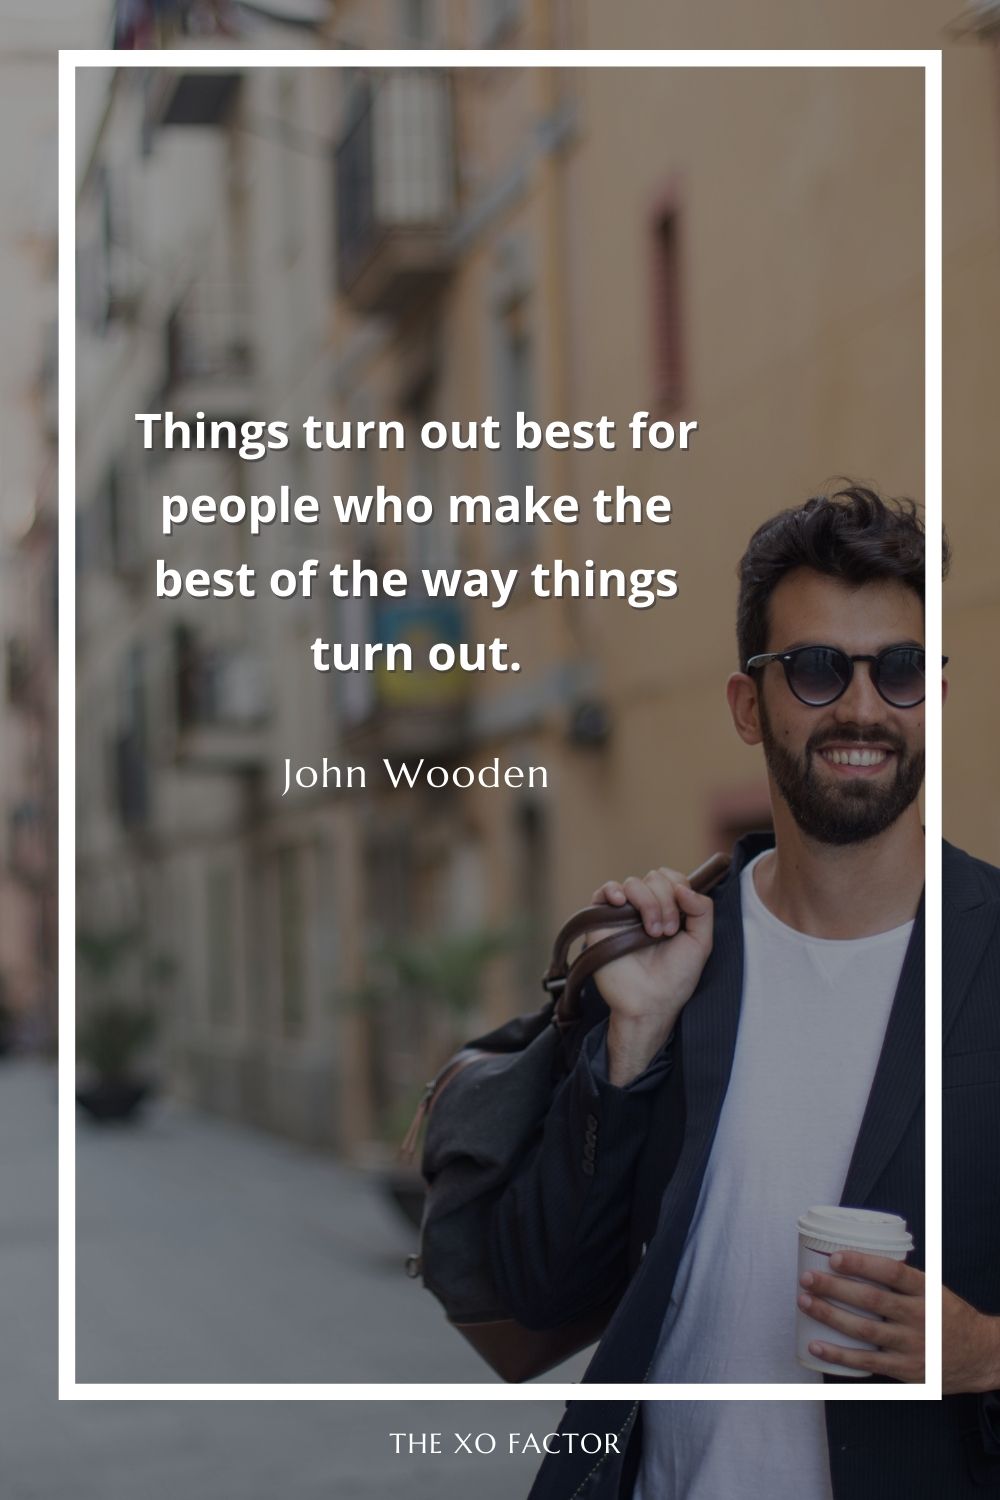 Things turn out best for people who make the best of the way things turn out.